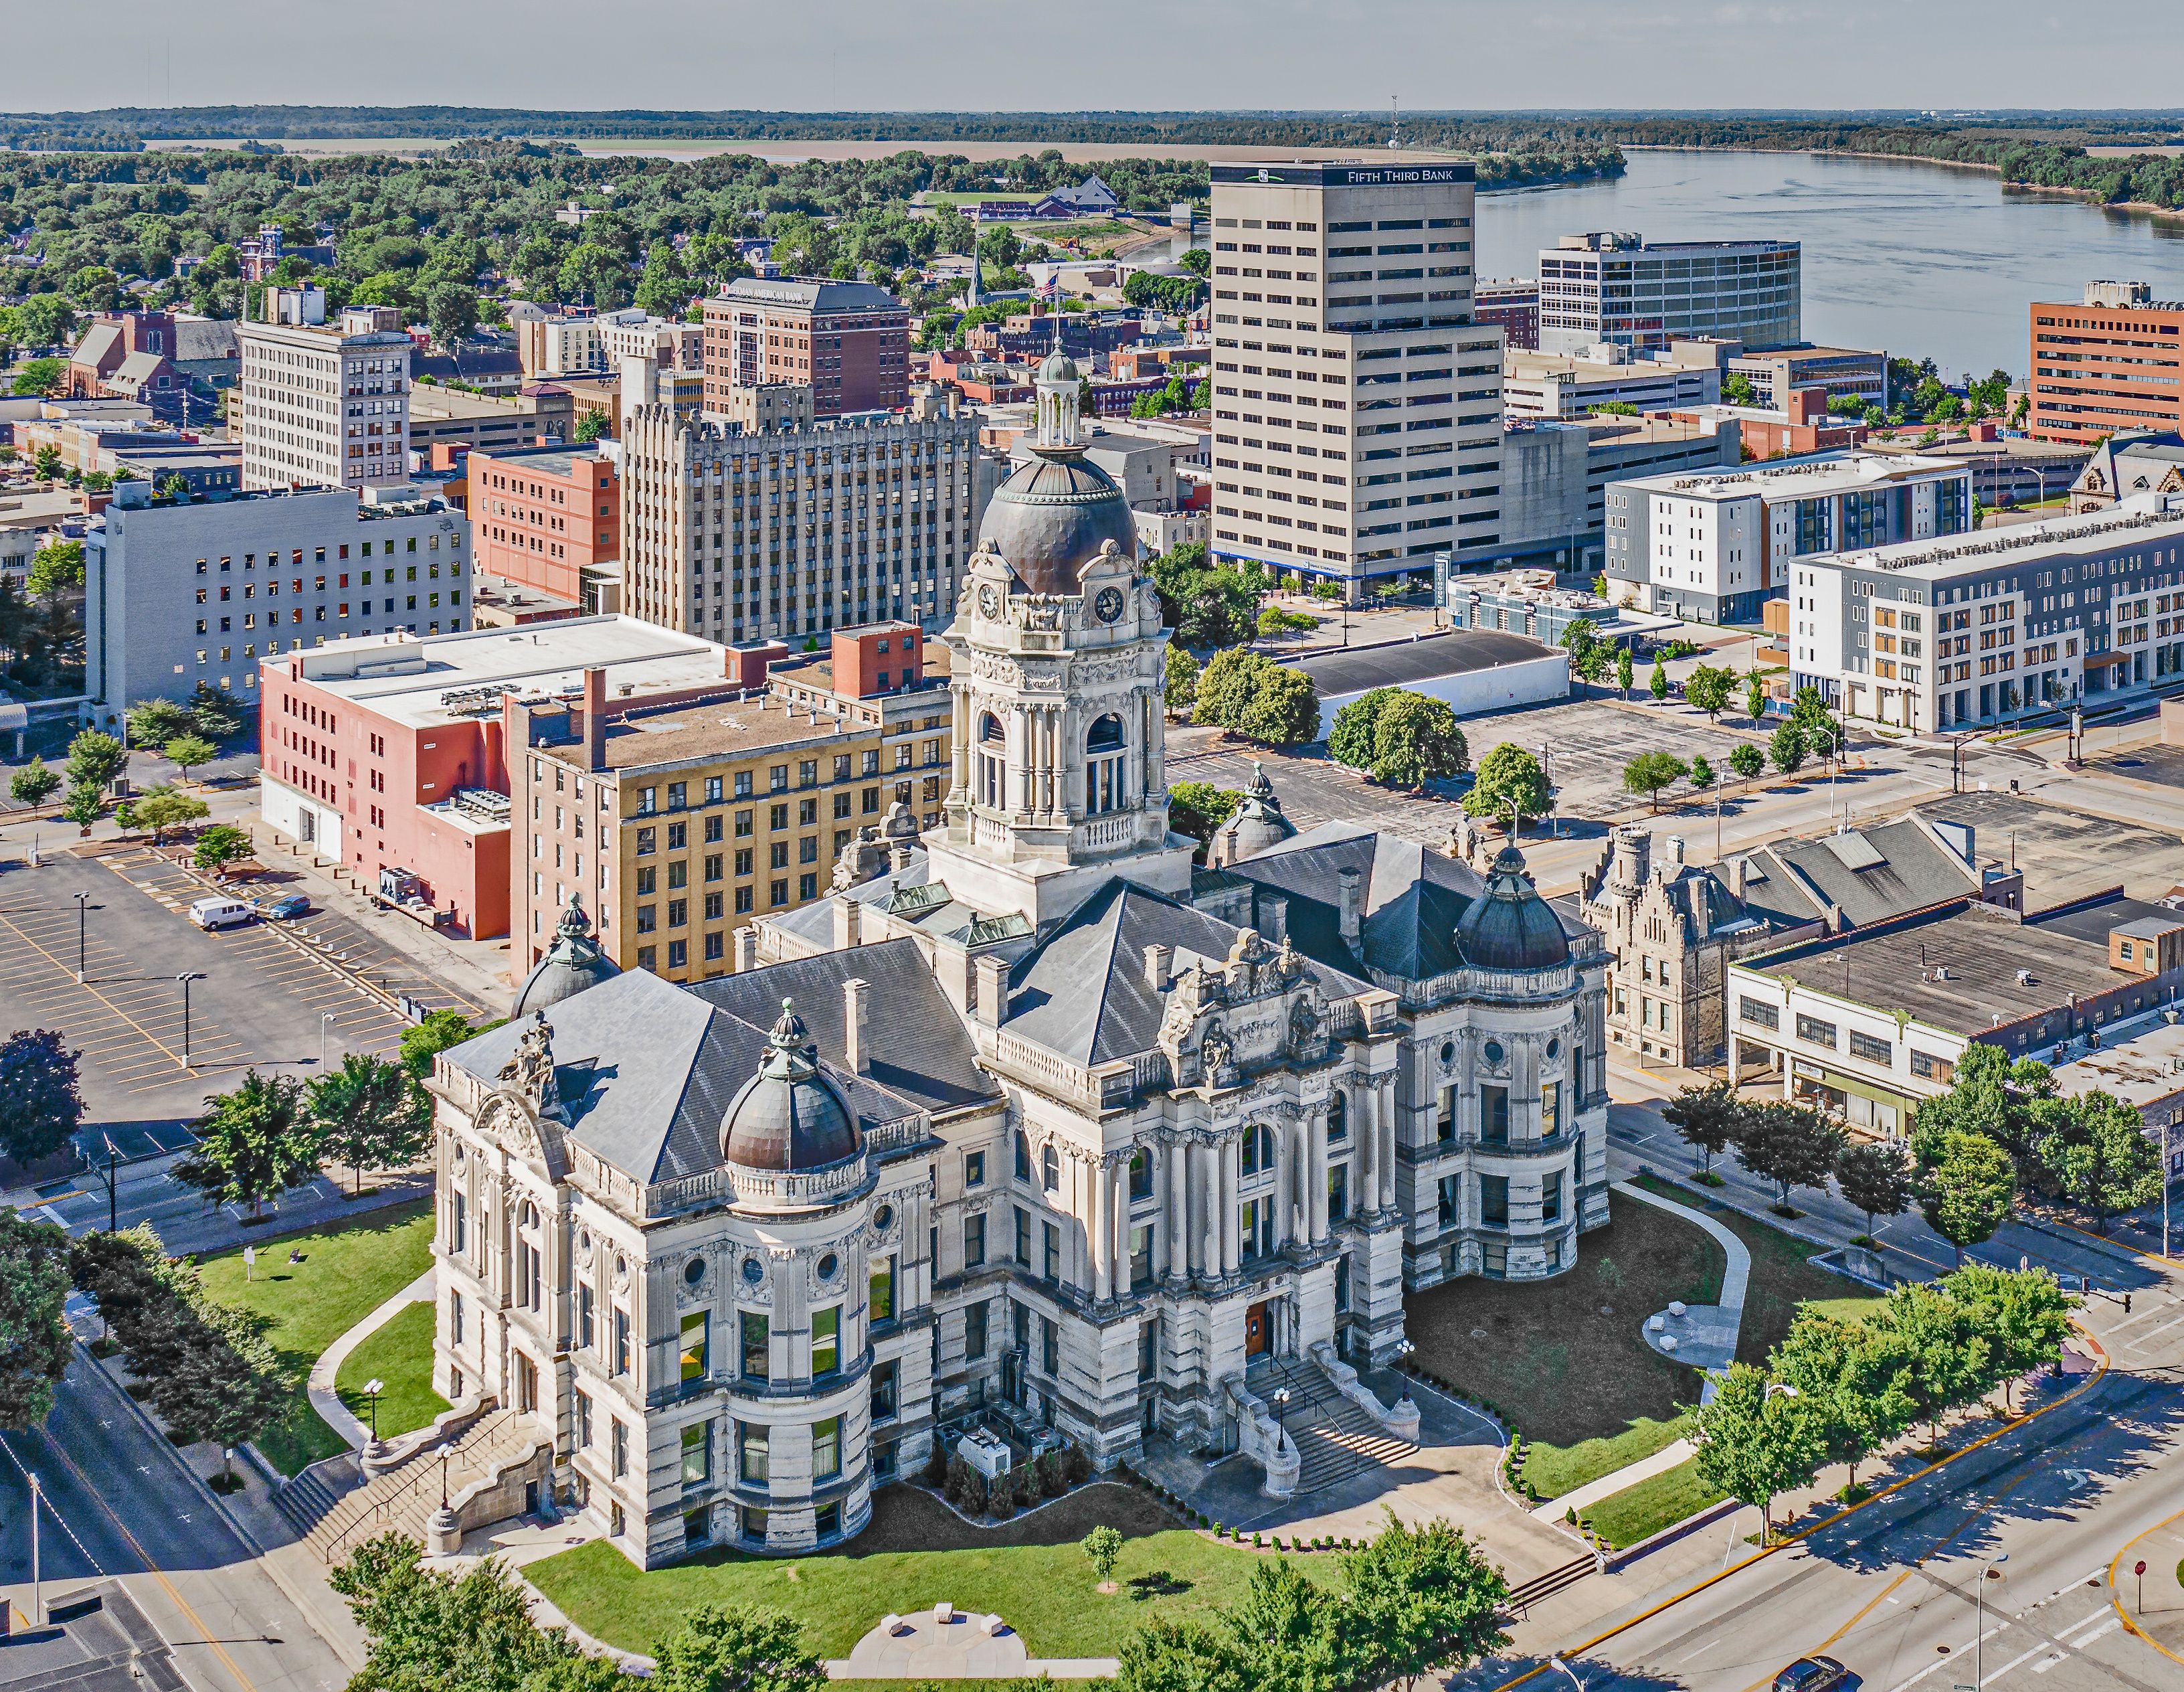 Aerial view of the Vanderburgh County Courthouse in Evansville, Indiana